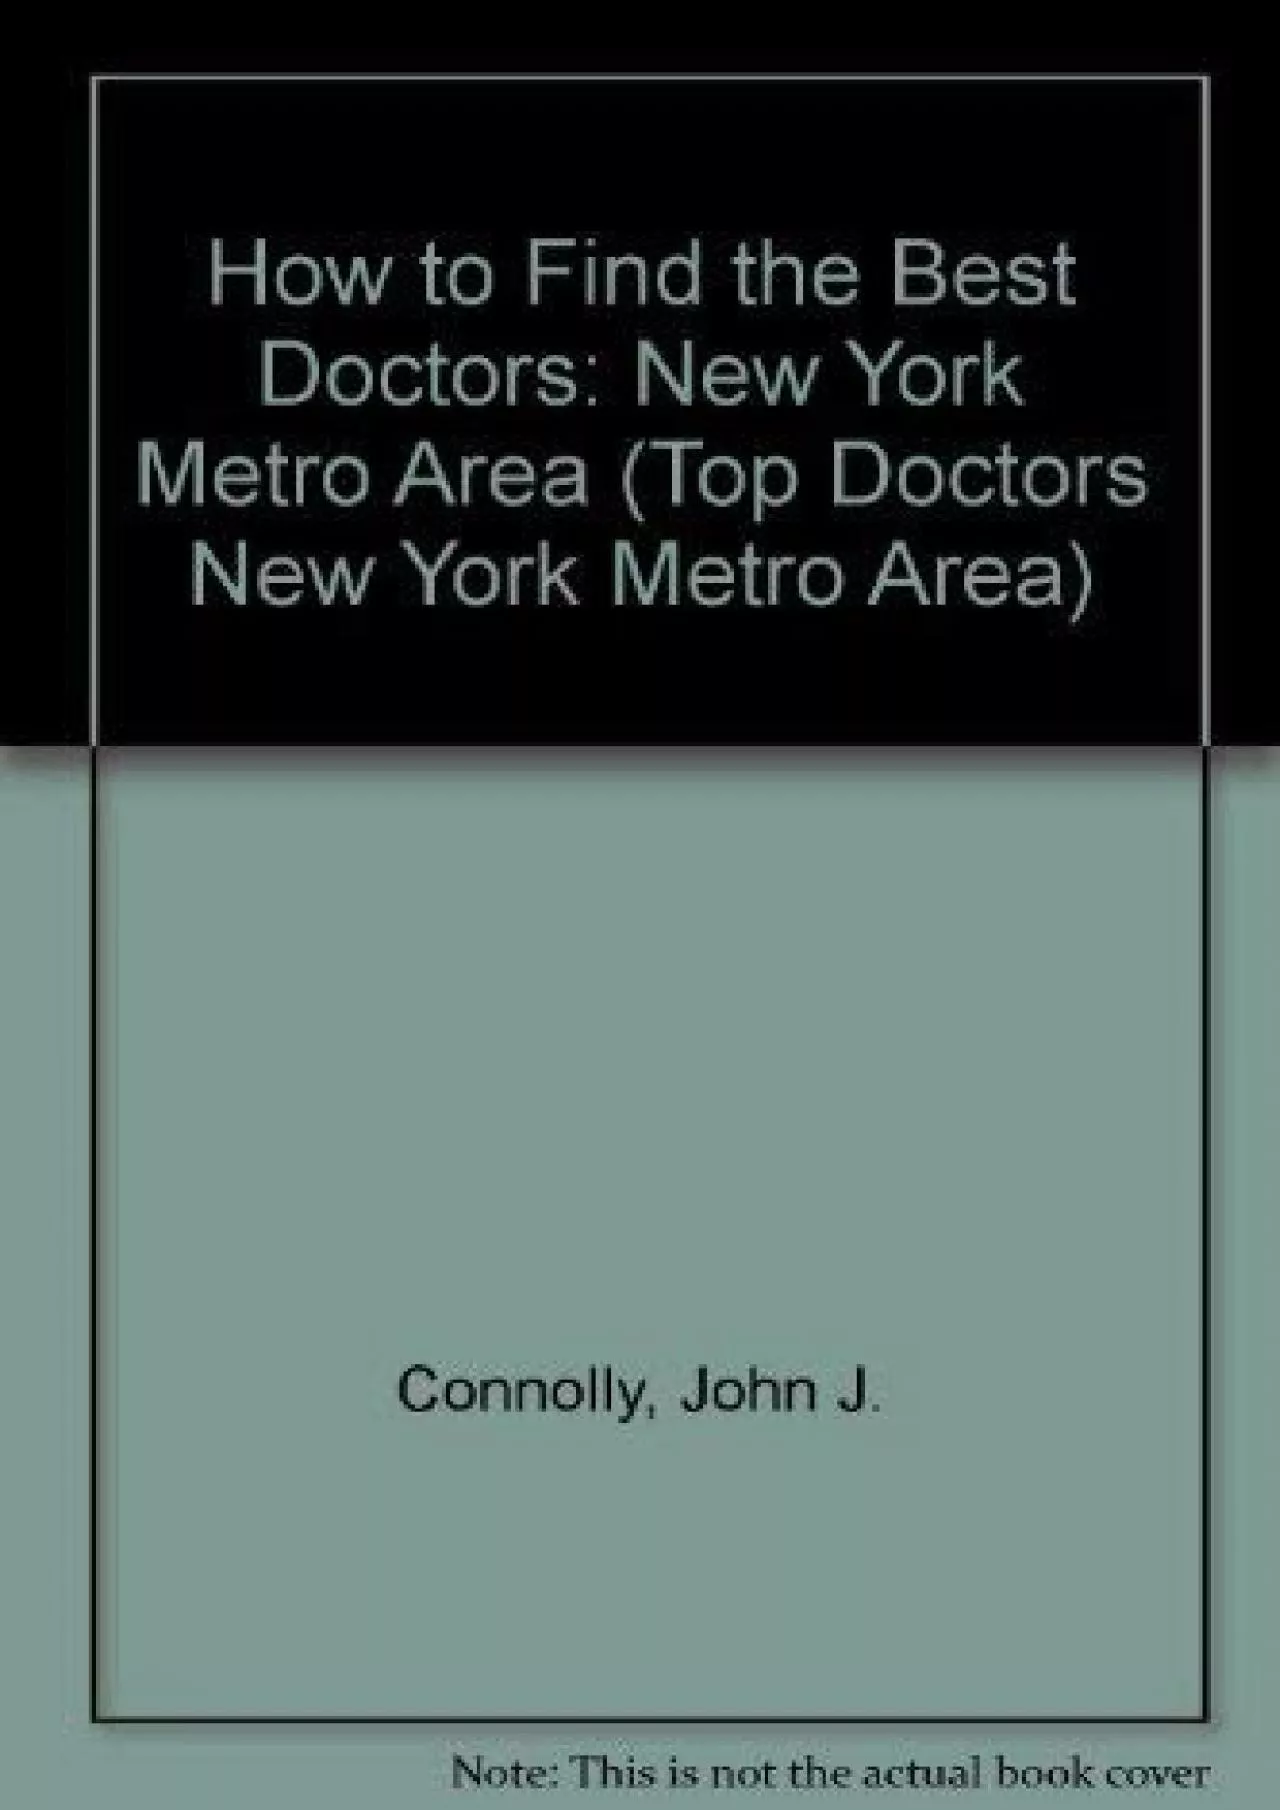 (BOOK)-How to Find the Best Doctors: New York Metro Area (TOP DOCTORS: NEW YORK METRO